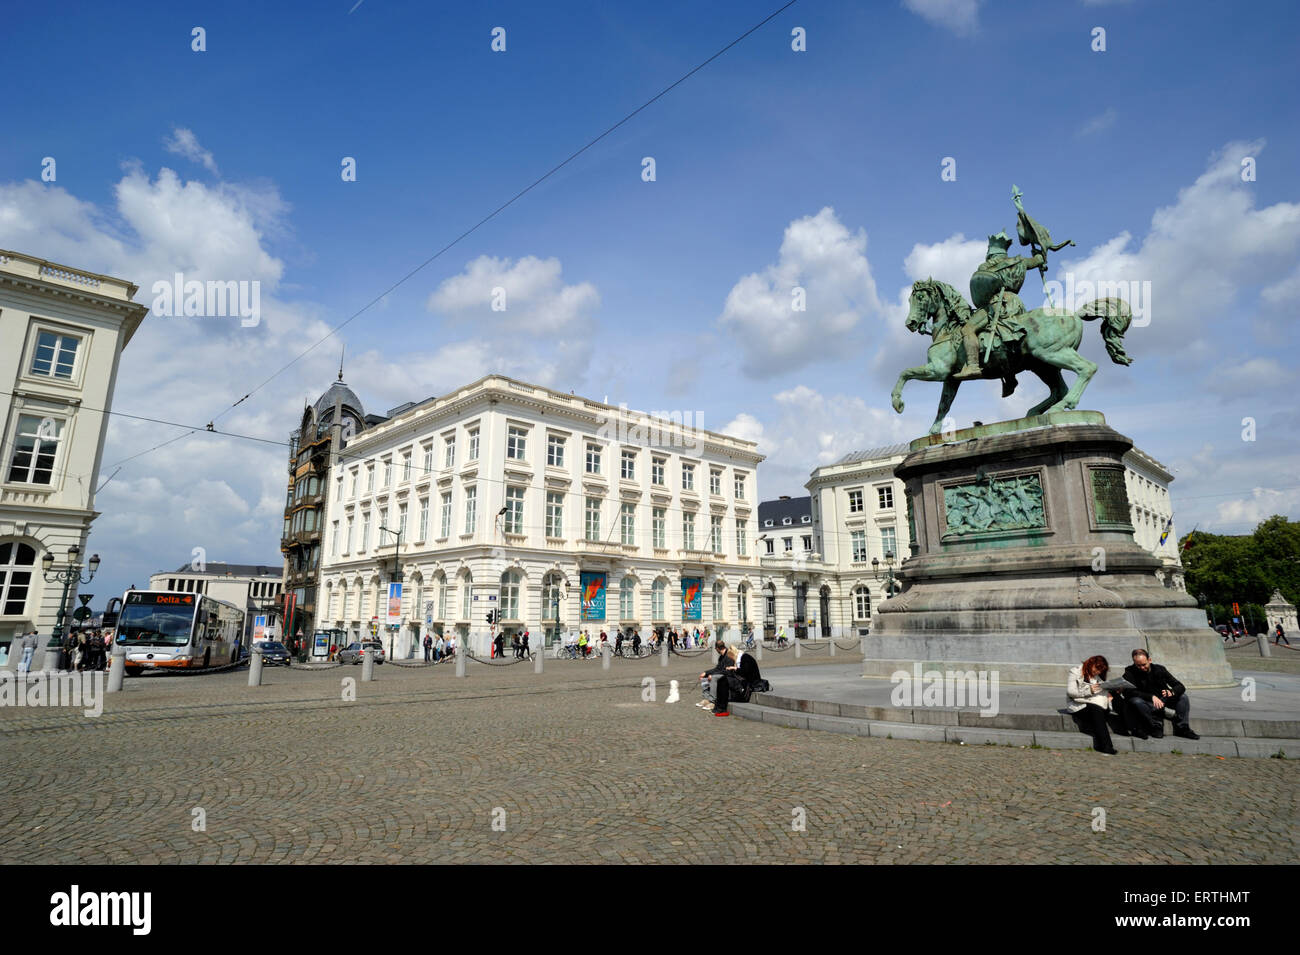 Belgium, Brussels, Place Royale, statue of Godfrey of Bouillon Stock Photo